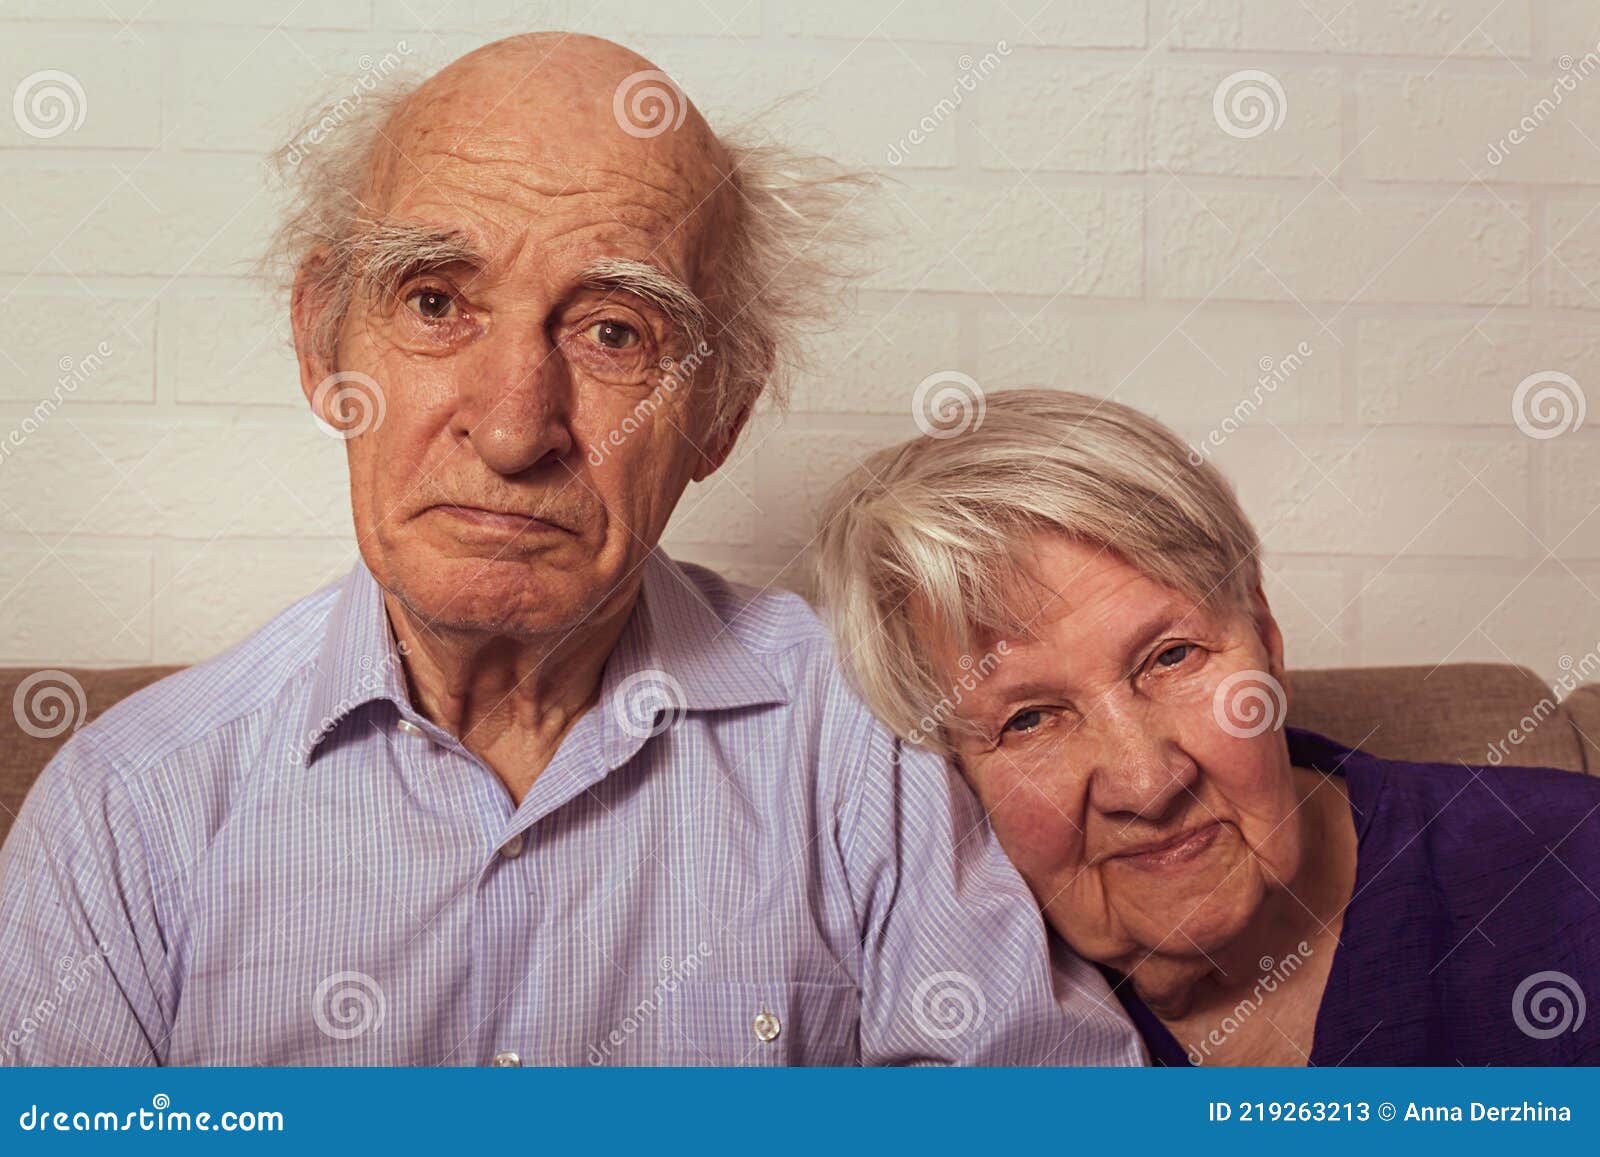 Grandma And Grandpa Cuddling Together On Couch Stock Image Image Of Husband Happiness 219263213 